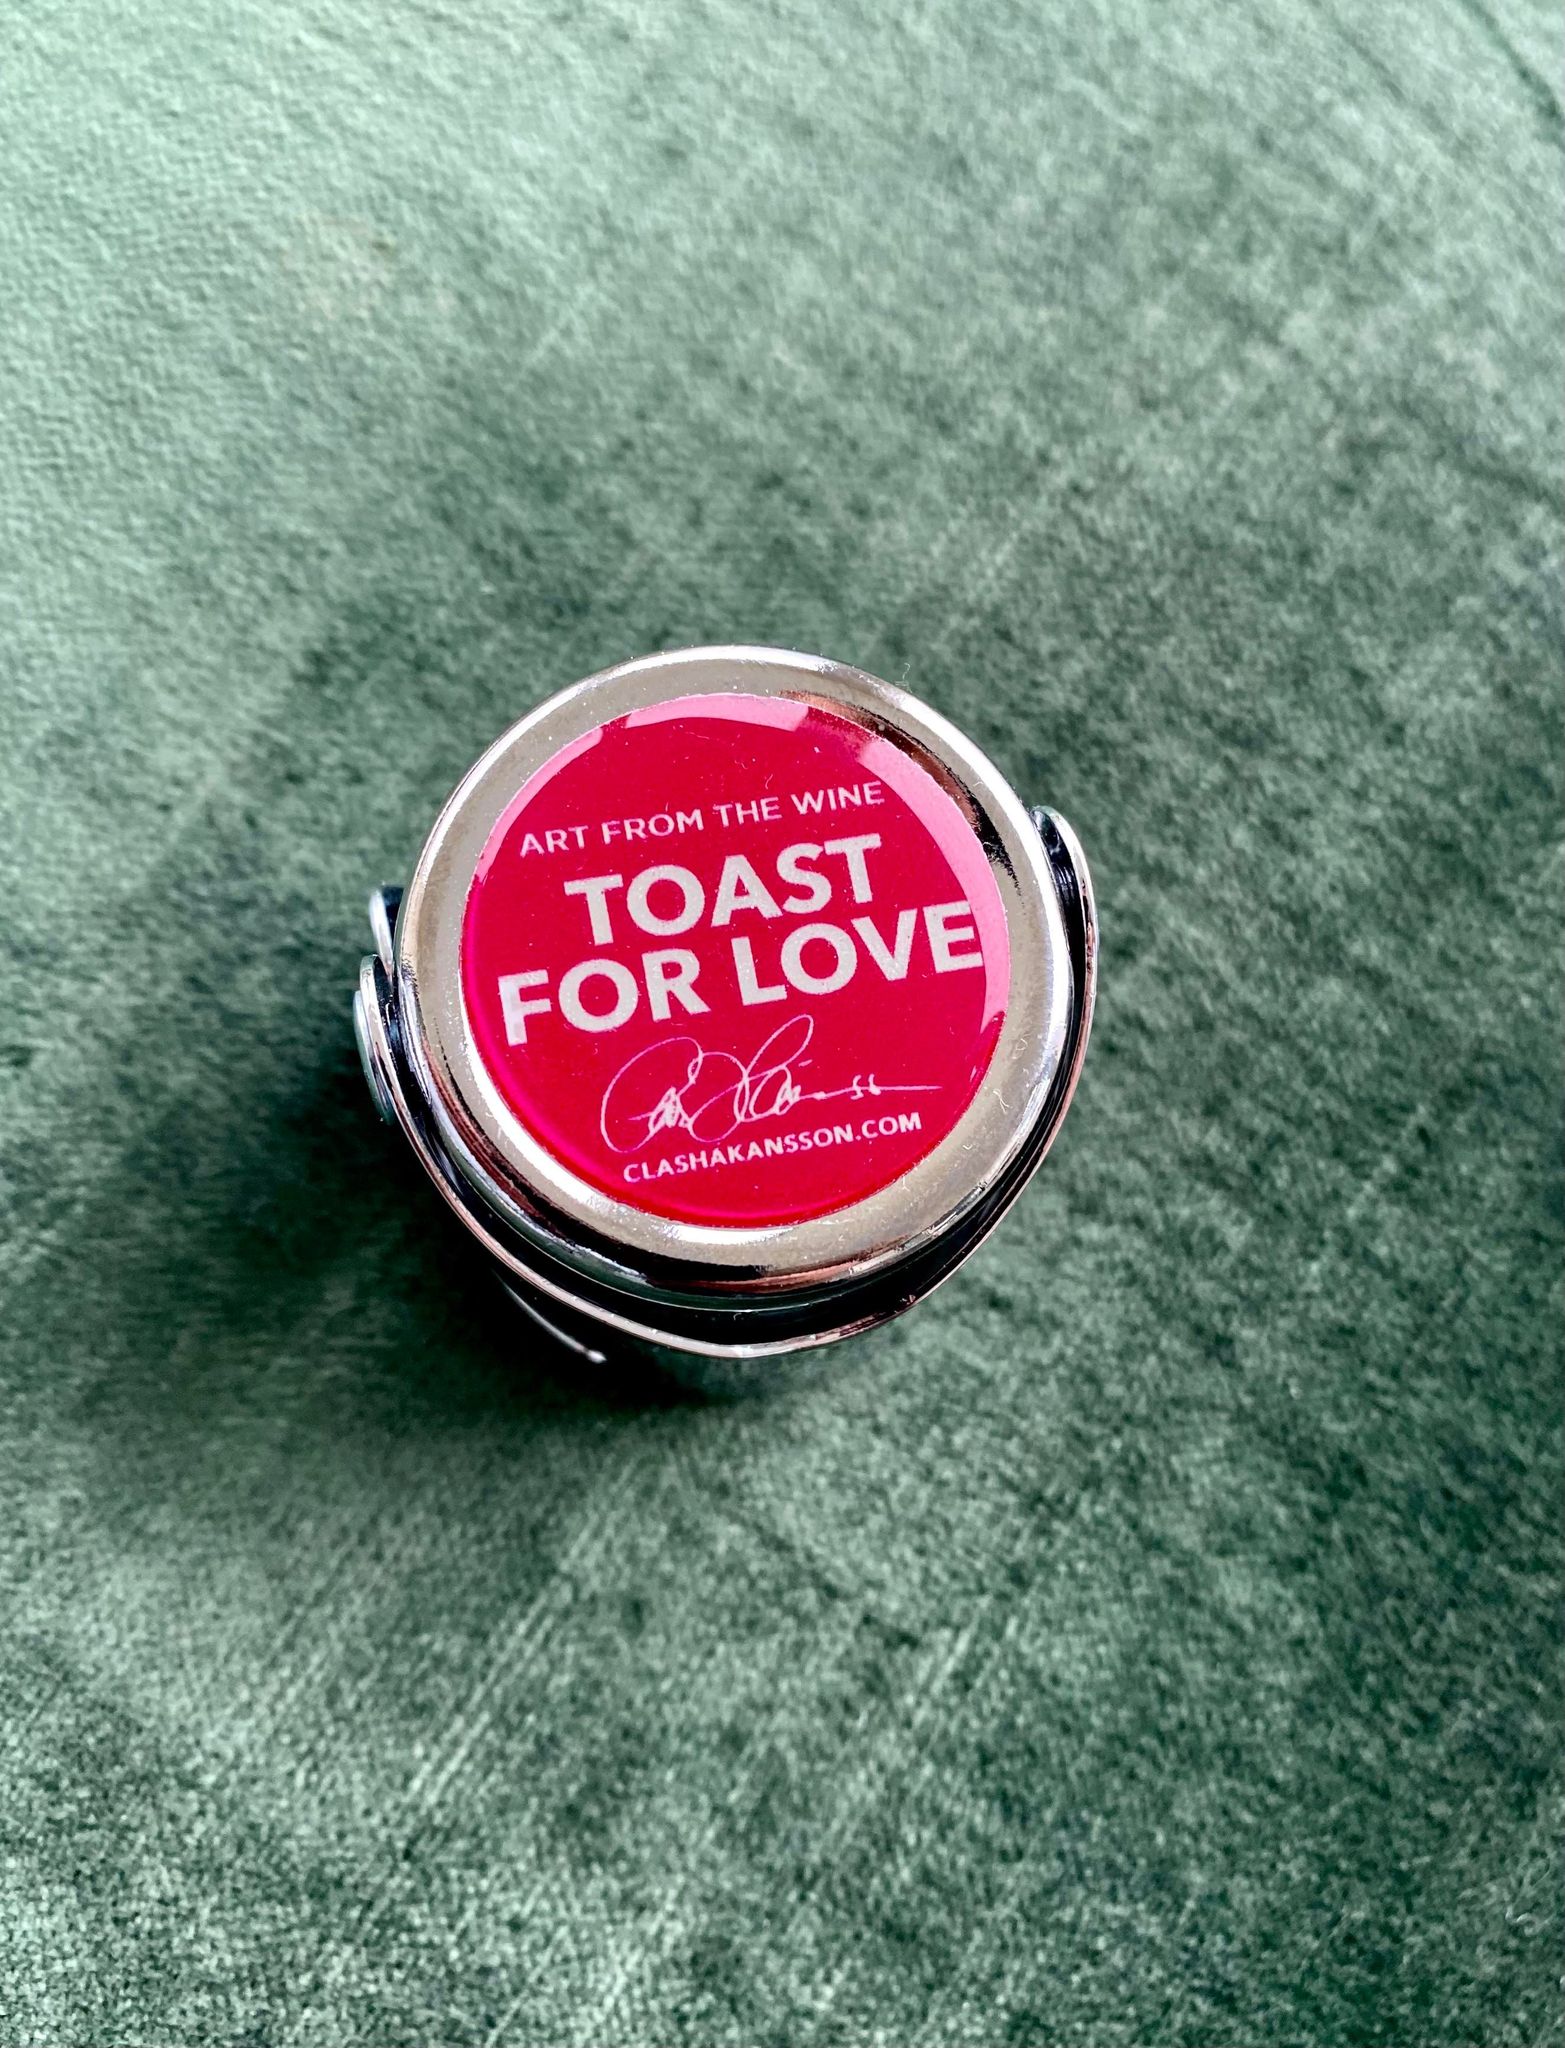 TOAST FOR LOVE - CHAMPAGNE STOPPER